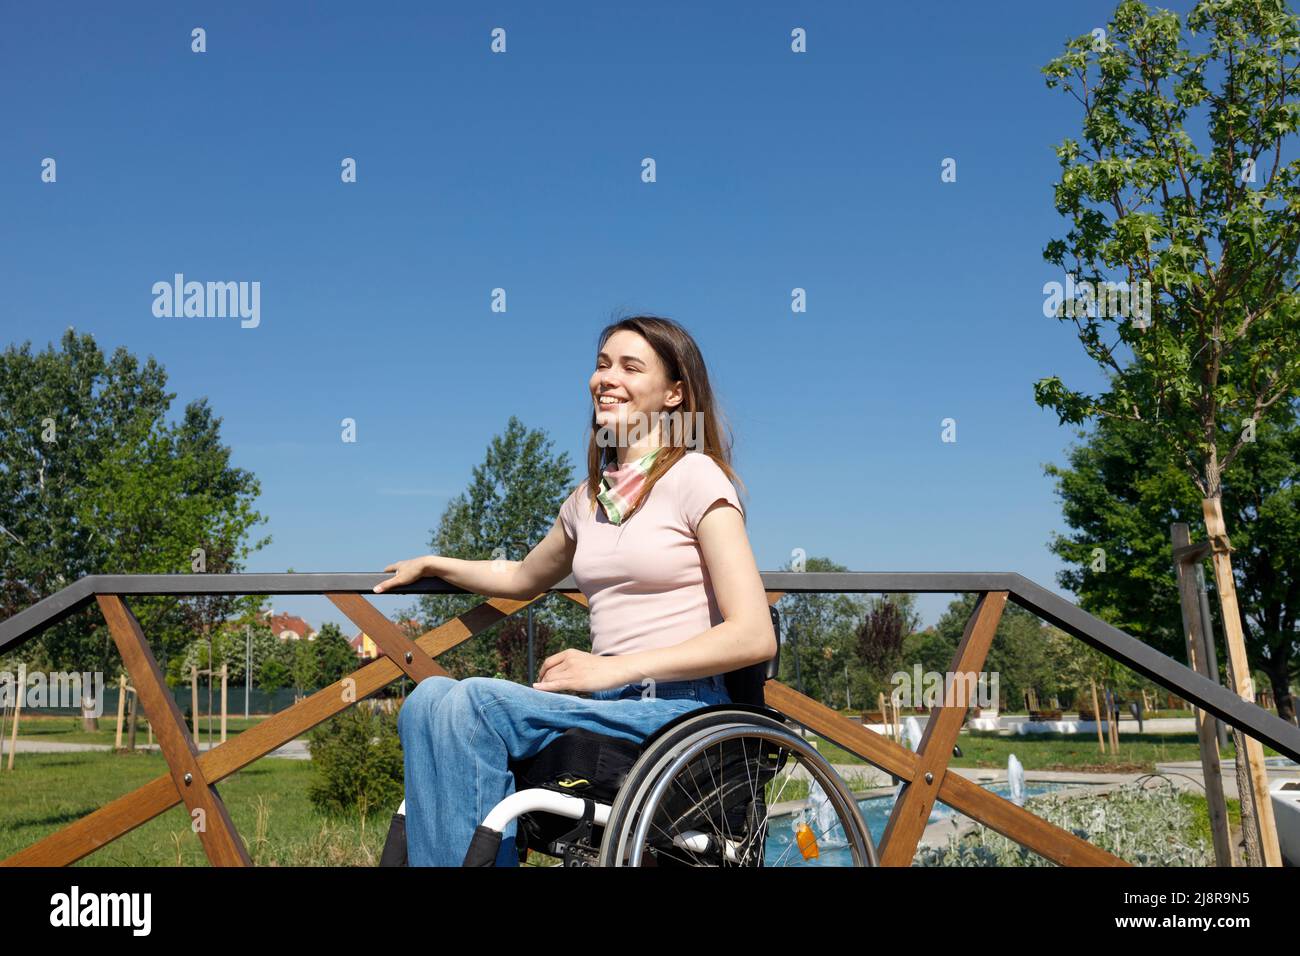 A woman smiling, enjoying and appreciating a pleasant summer day alone in her wheelchair Stock Photo